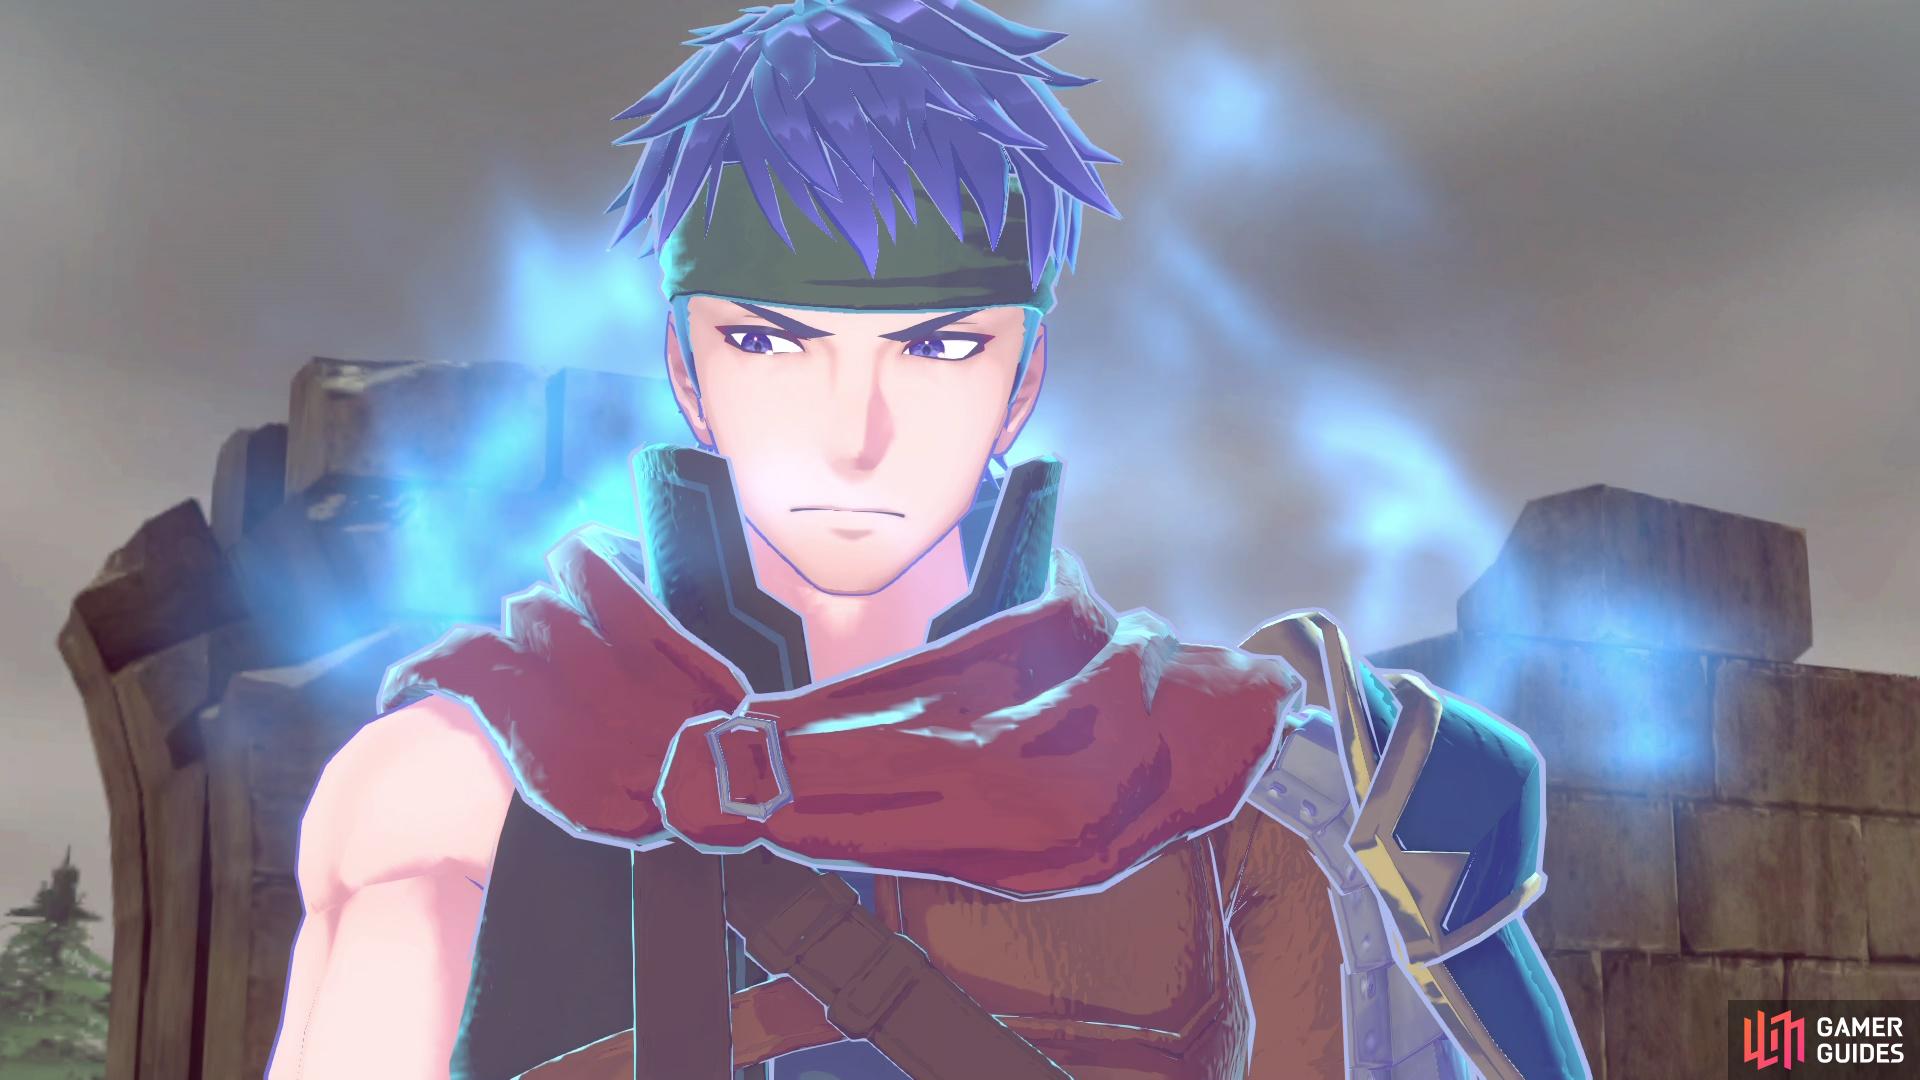 You will unlock Ike's Paralogue at the start of Chapter 14.